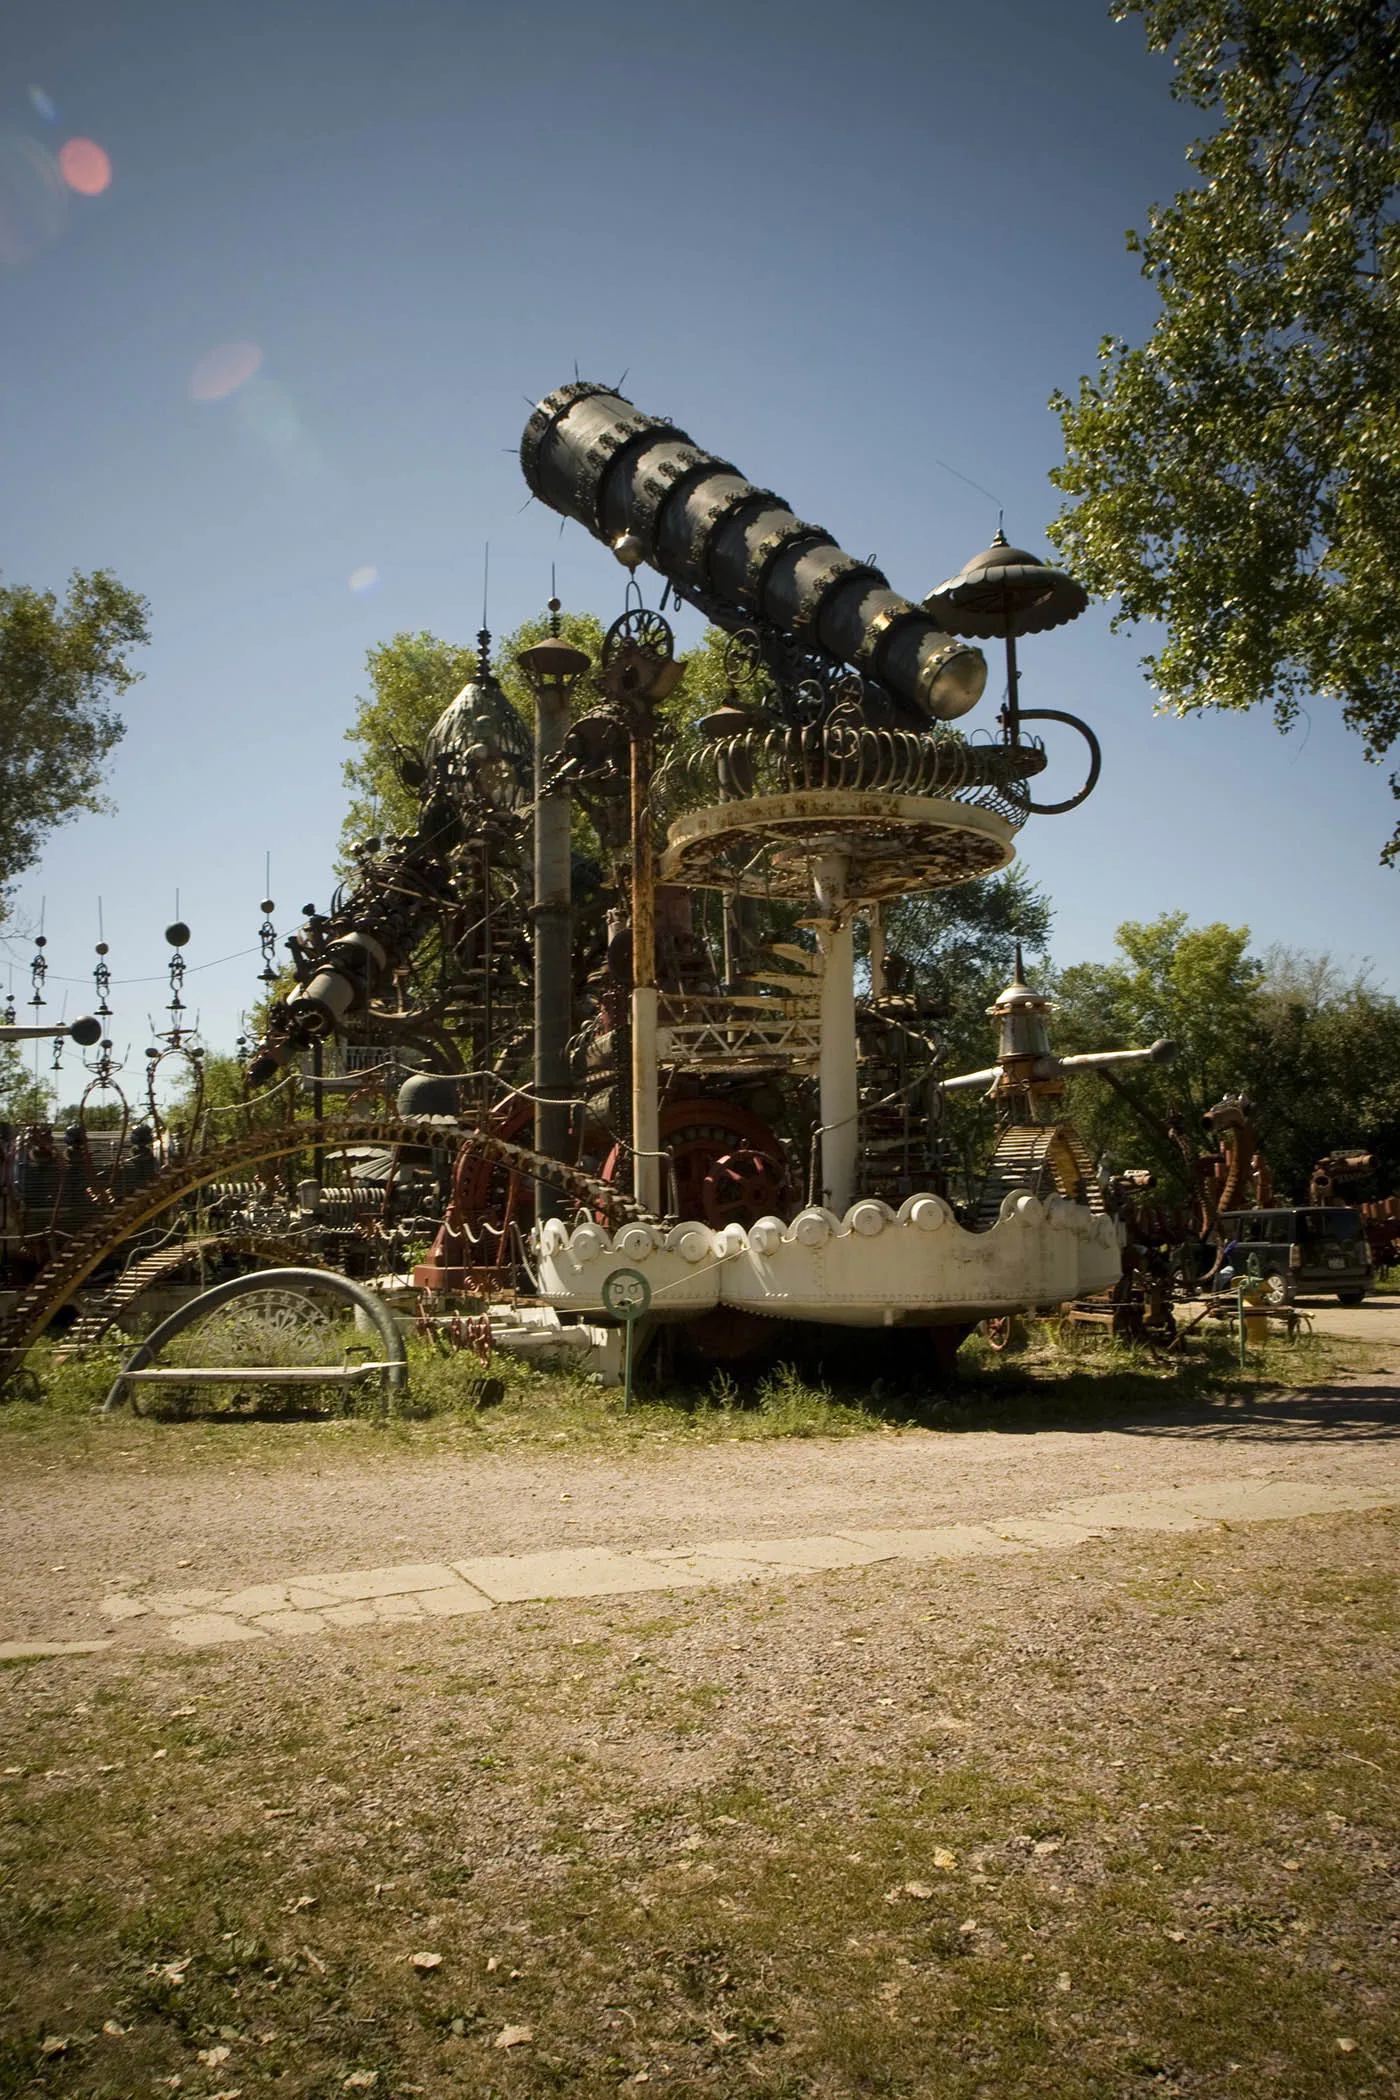 The world's largest scrap metal sculpture, Dr. Evermor's Forevertron at Delaney's Surplus Sales in Sumpter, Wisconsin, is meant for intergalactic travel. Visit this weird roadside attraction on a Wisconsin road trip.